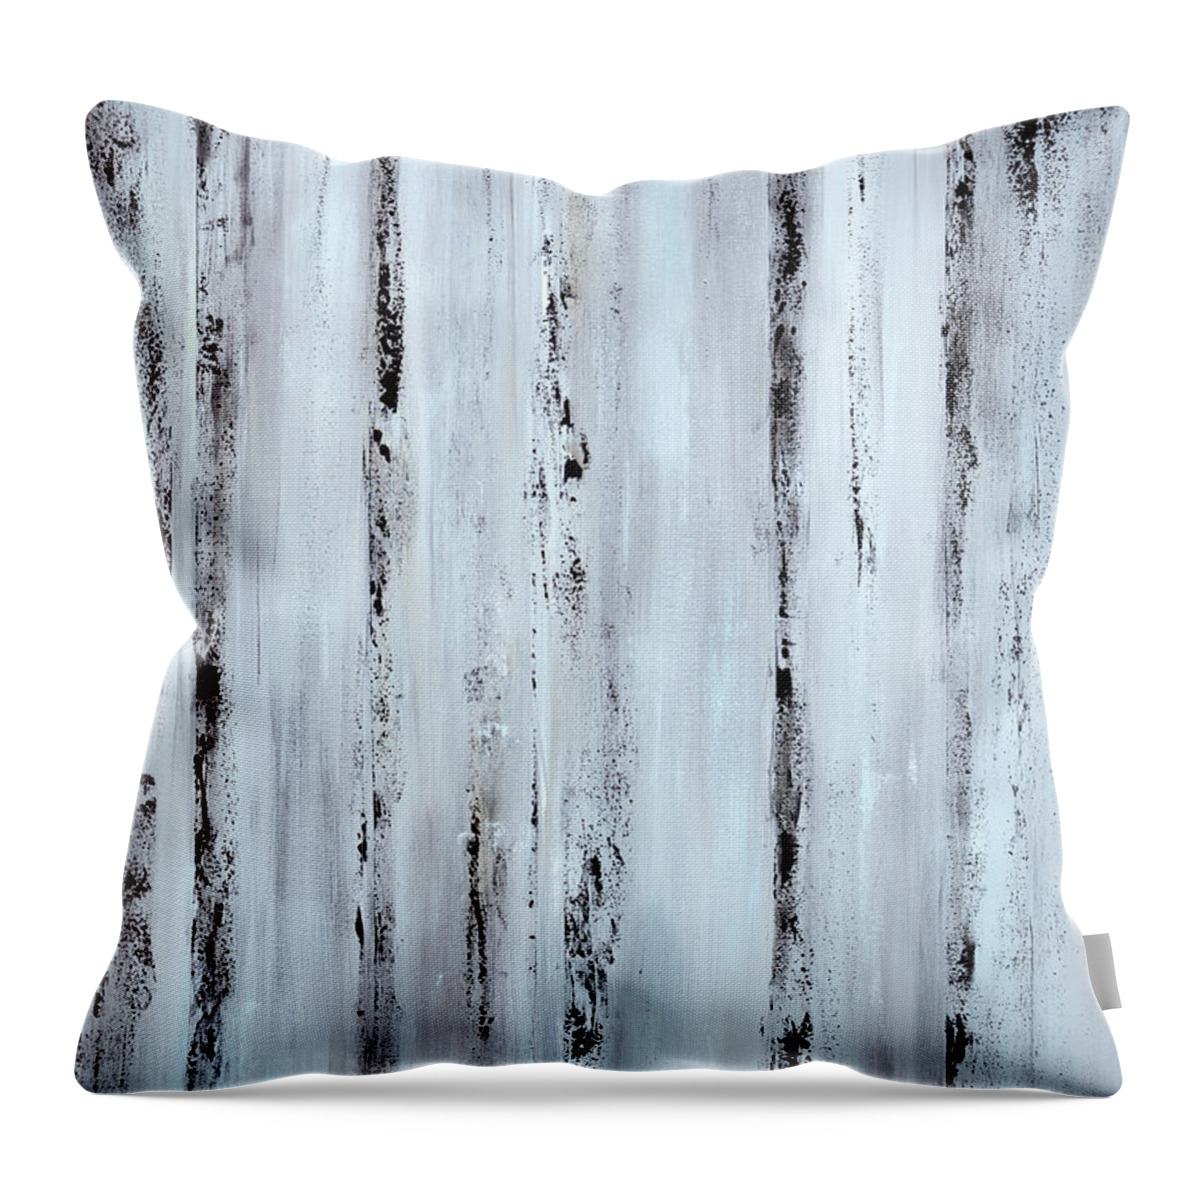 Urban Throw Pillow featuring the painting Pier Planks by Tamara Nelson